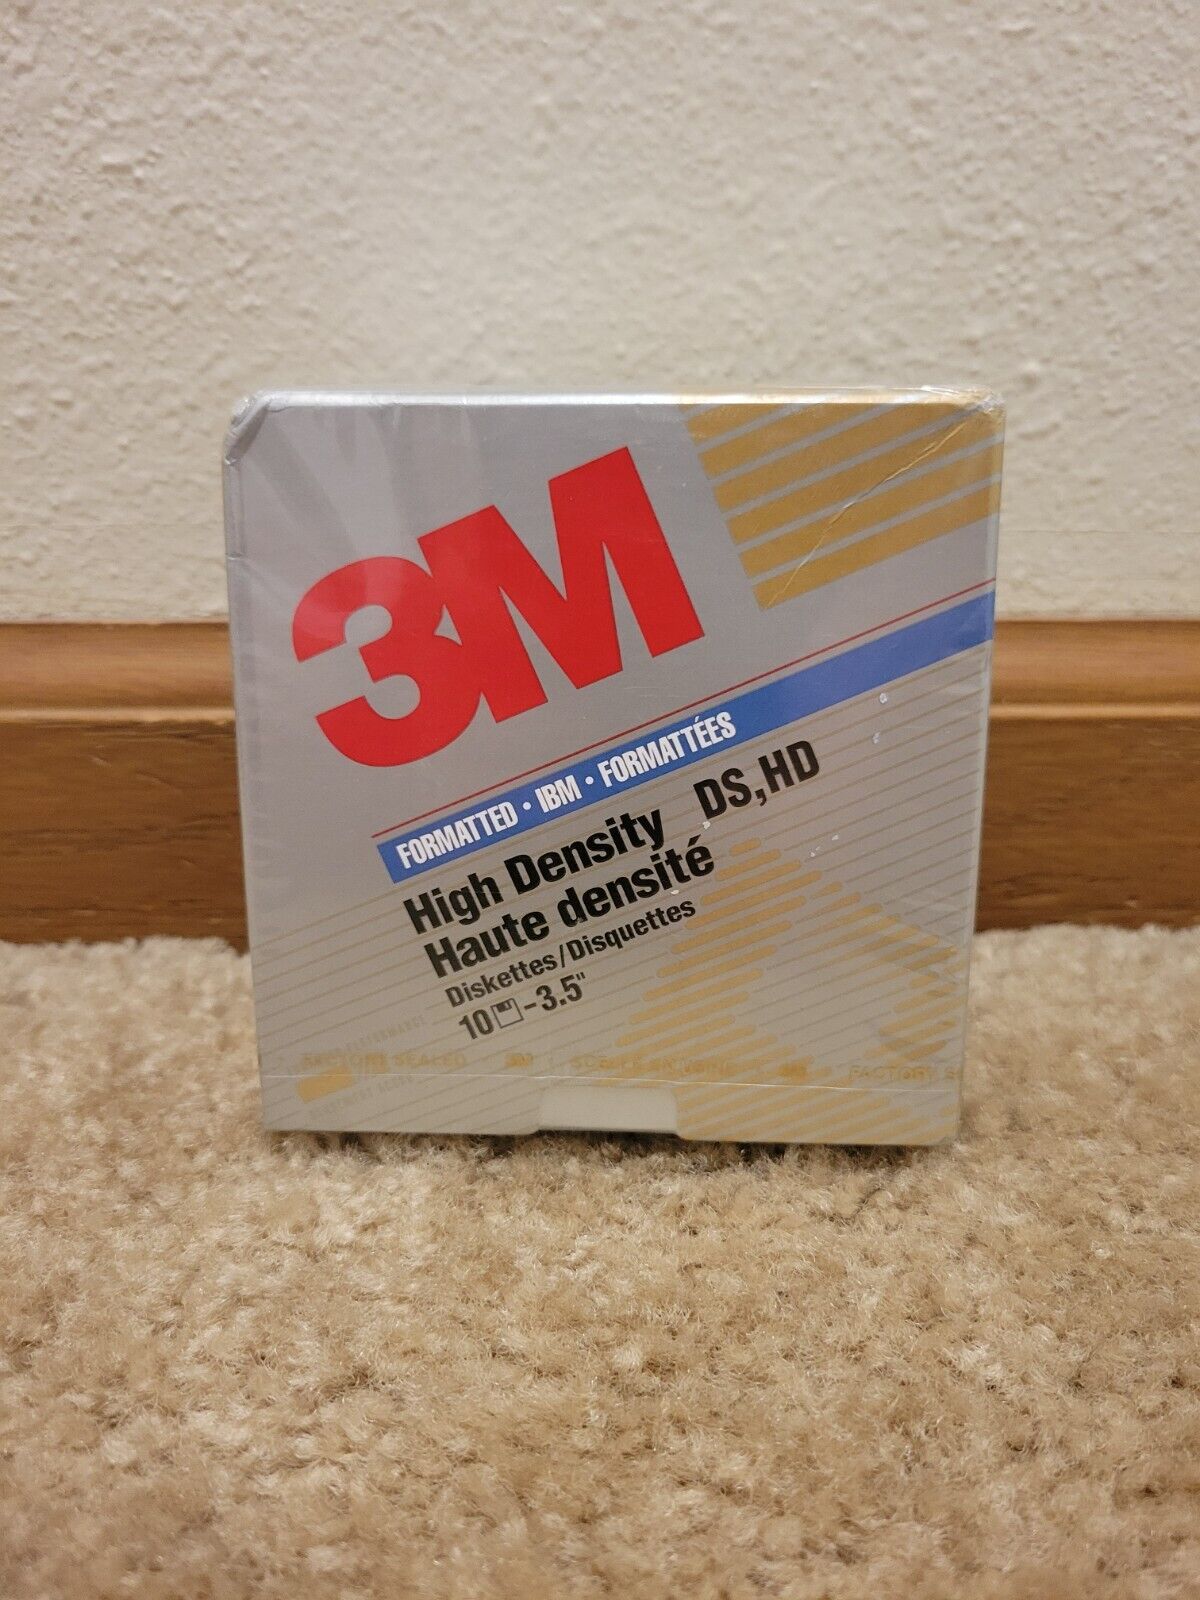 3M High Density 3.5 Diskettes 10 Pack IBM Formatted DS HD Double Sided SEALED